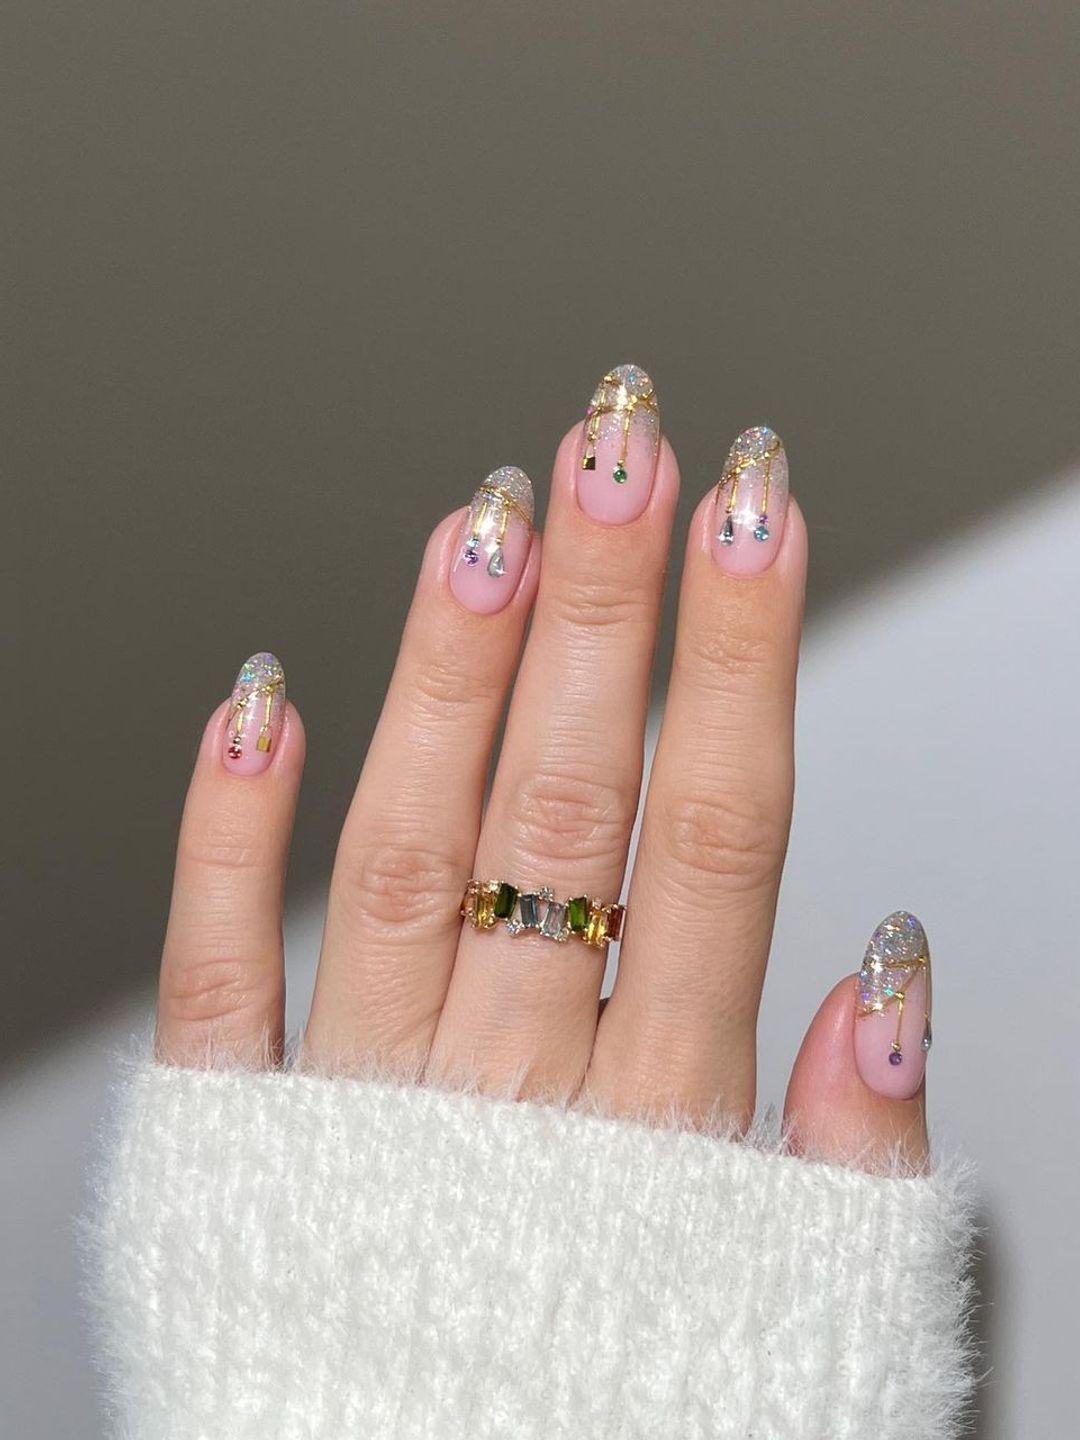 Nails with jewel gems 